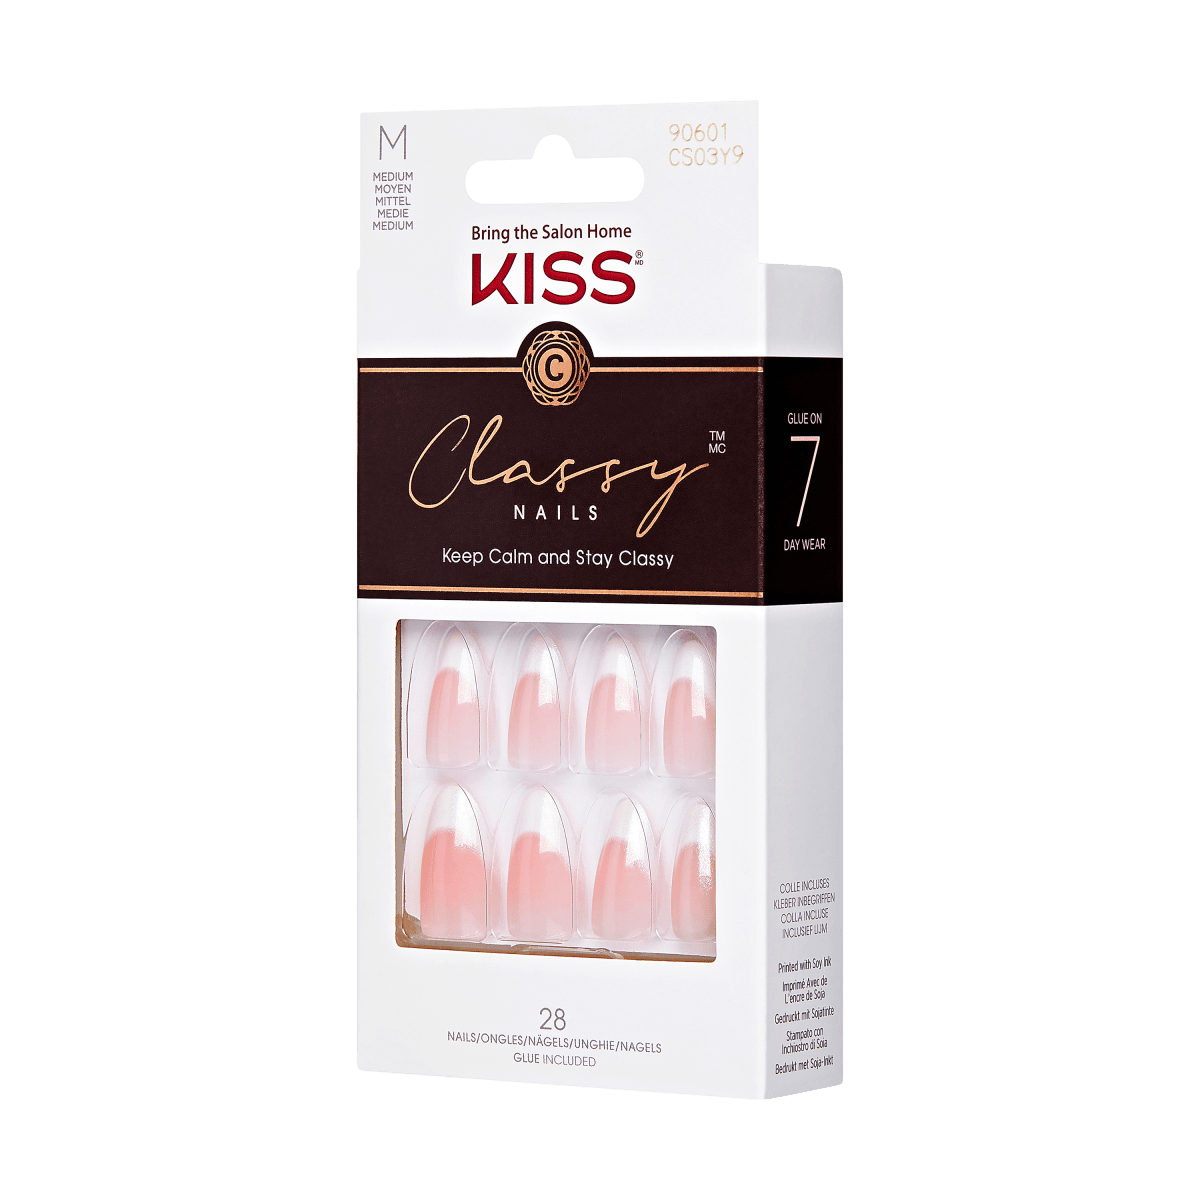 KISS Classy Nails - Tie the Knot